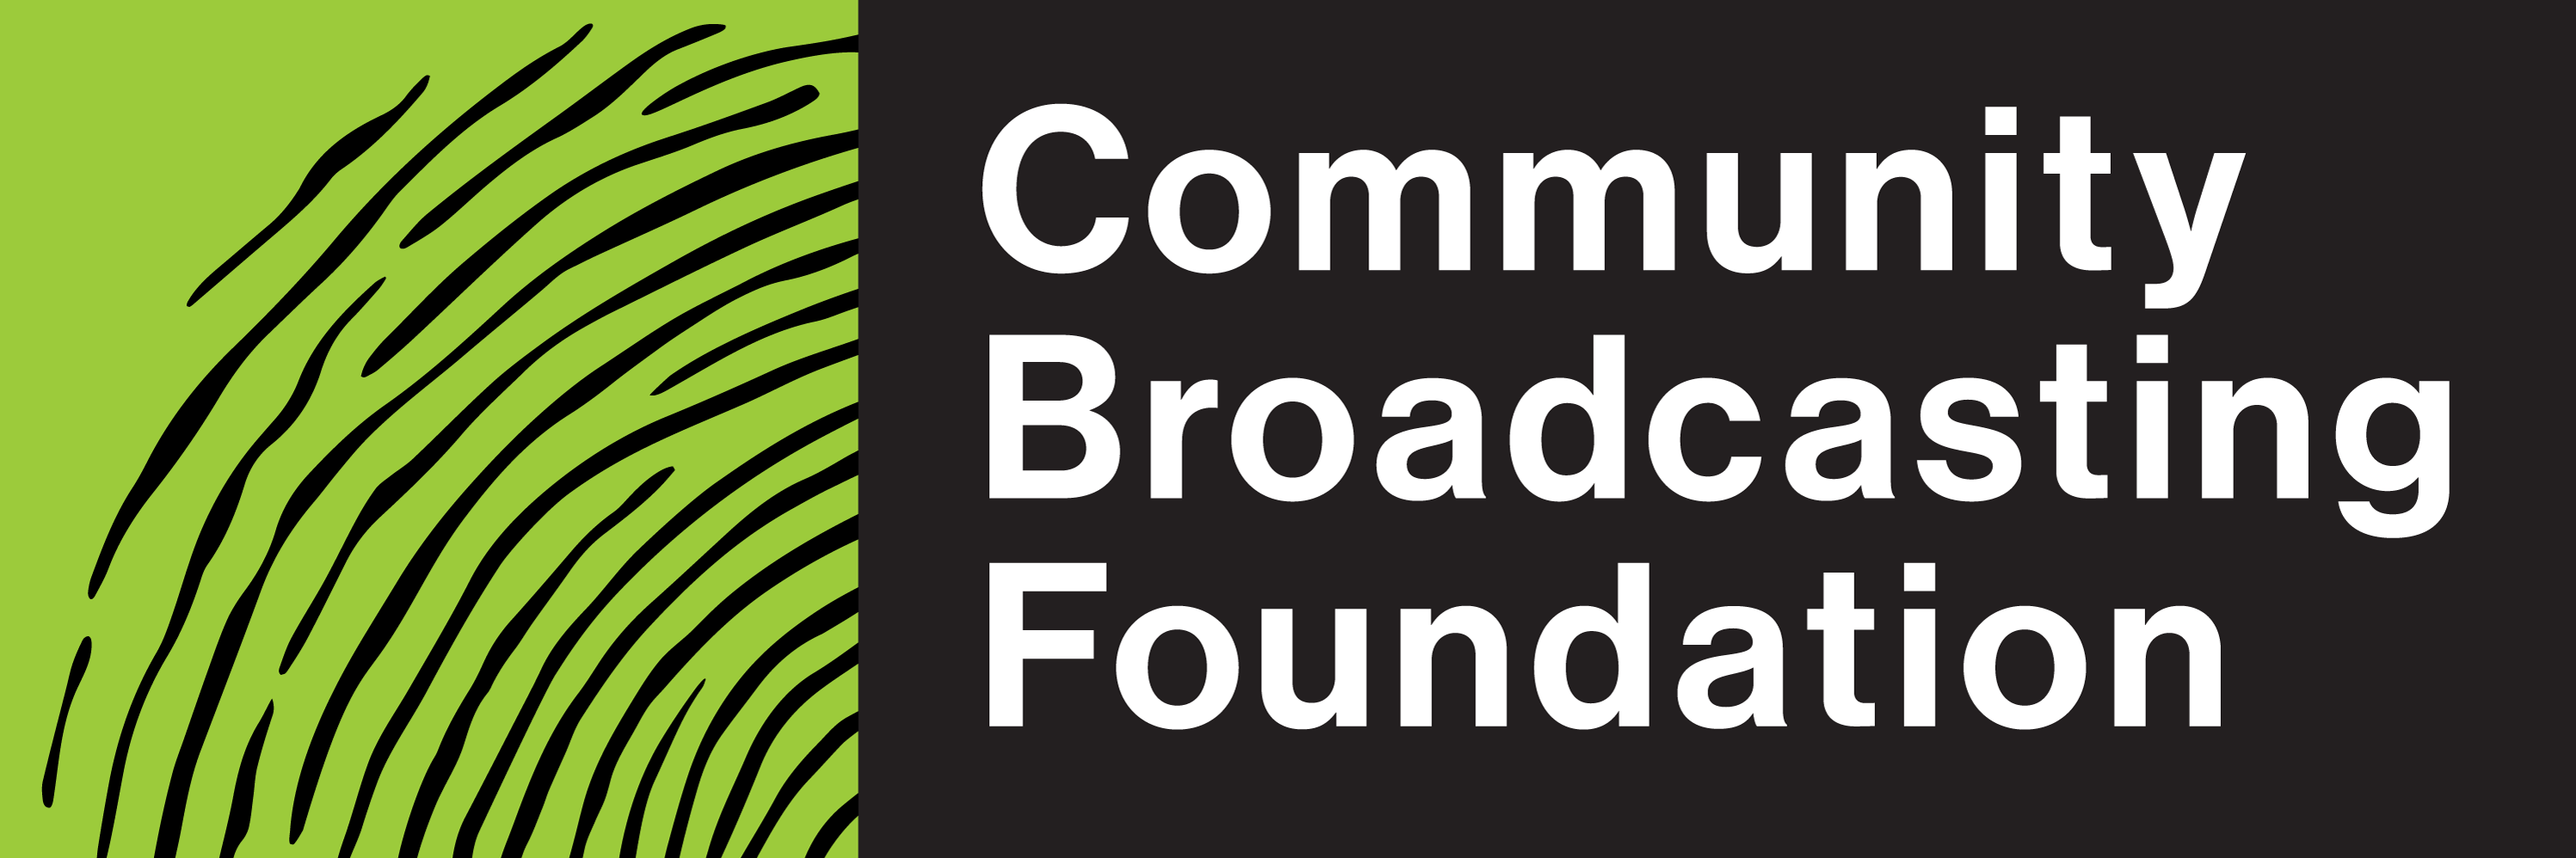 Community Broadcasting Foundation in white writing on black background beside green square with sound waves